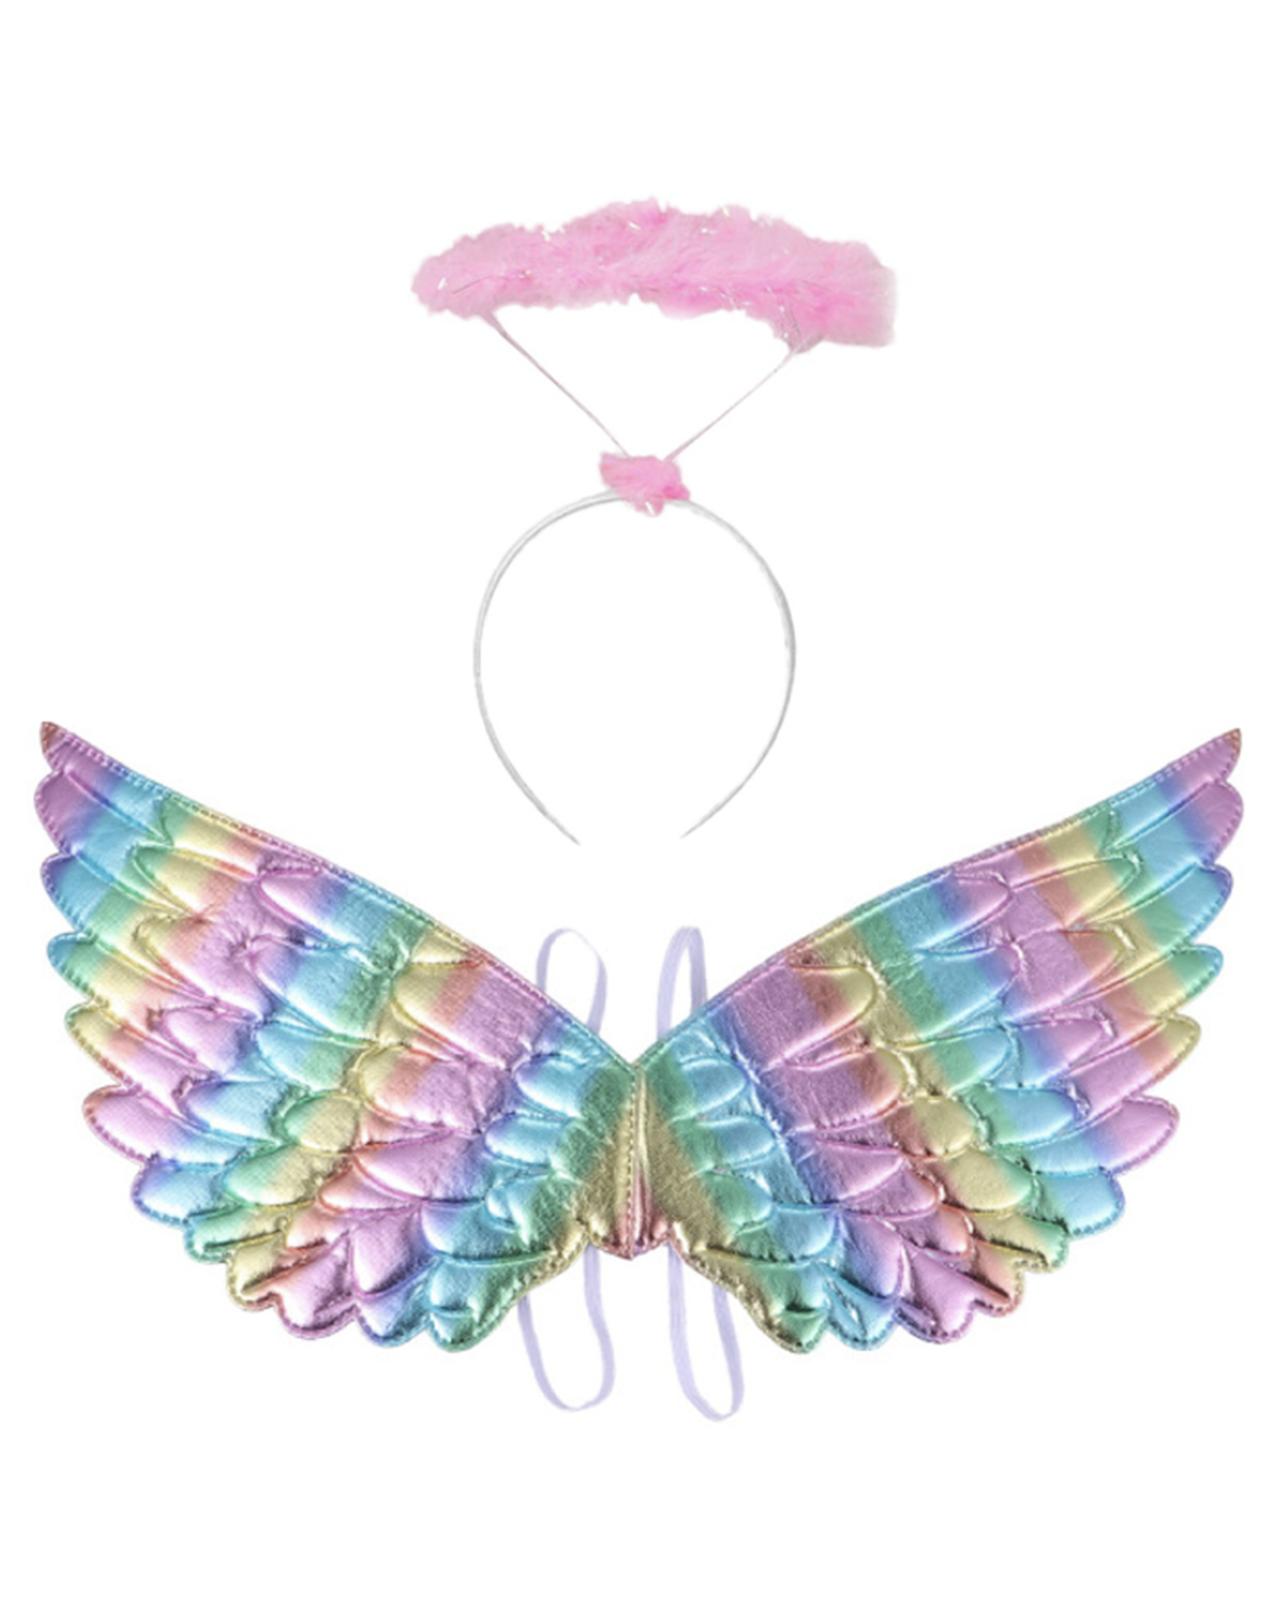 Pastel Rainbow Mini Wings with Pink Halo